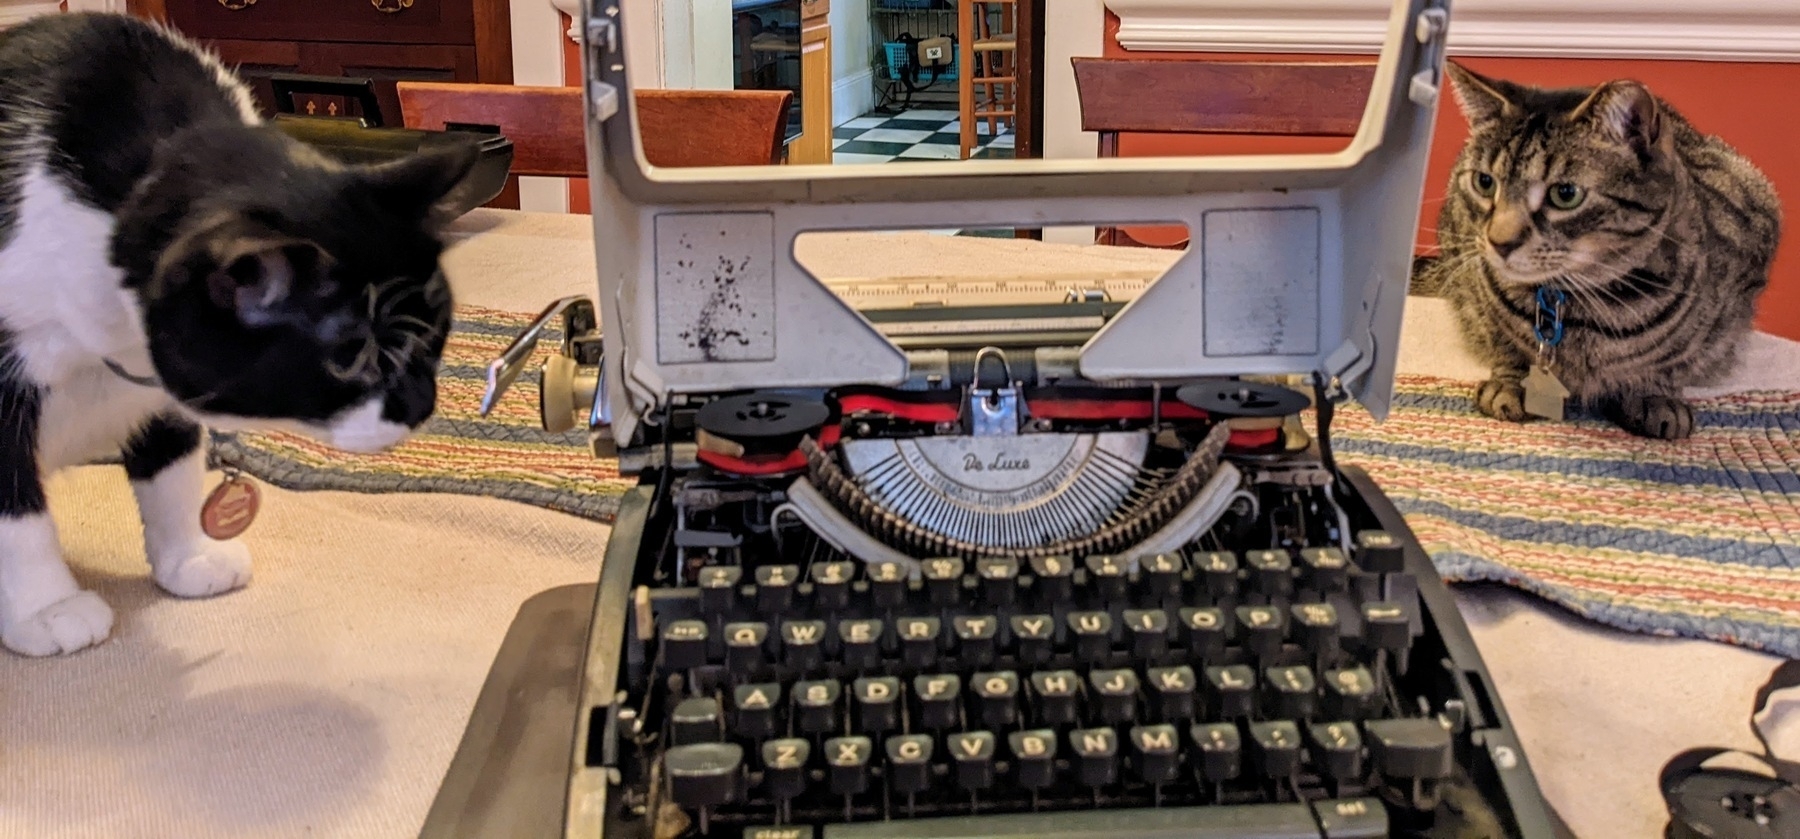 two wide-eyed cats, who have never seen a typewriter before, sit stiffly on a table, near the typewriter, with a typewriter ribbon unwound from its spool